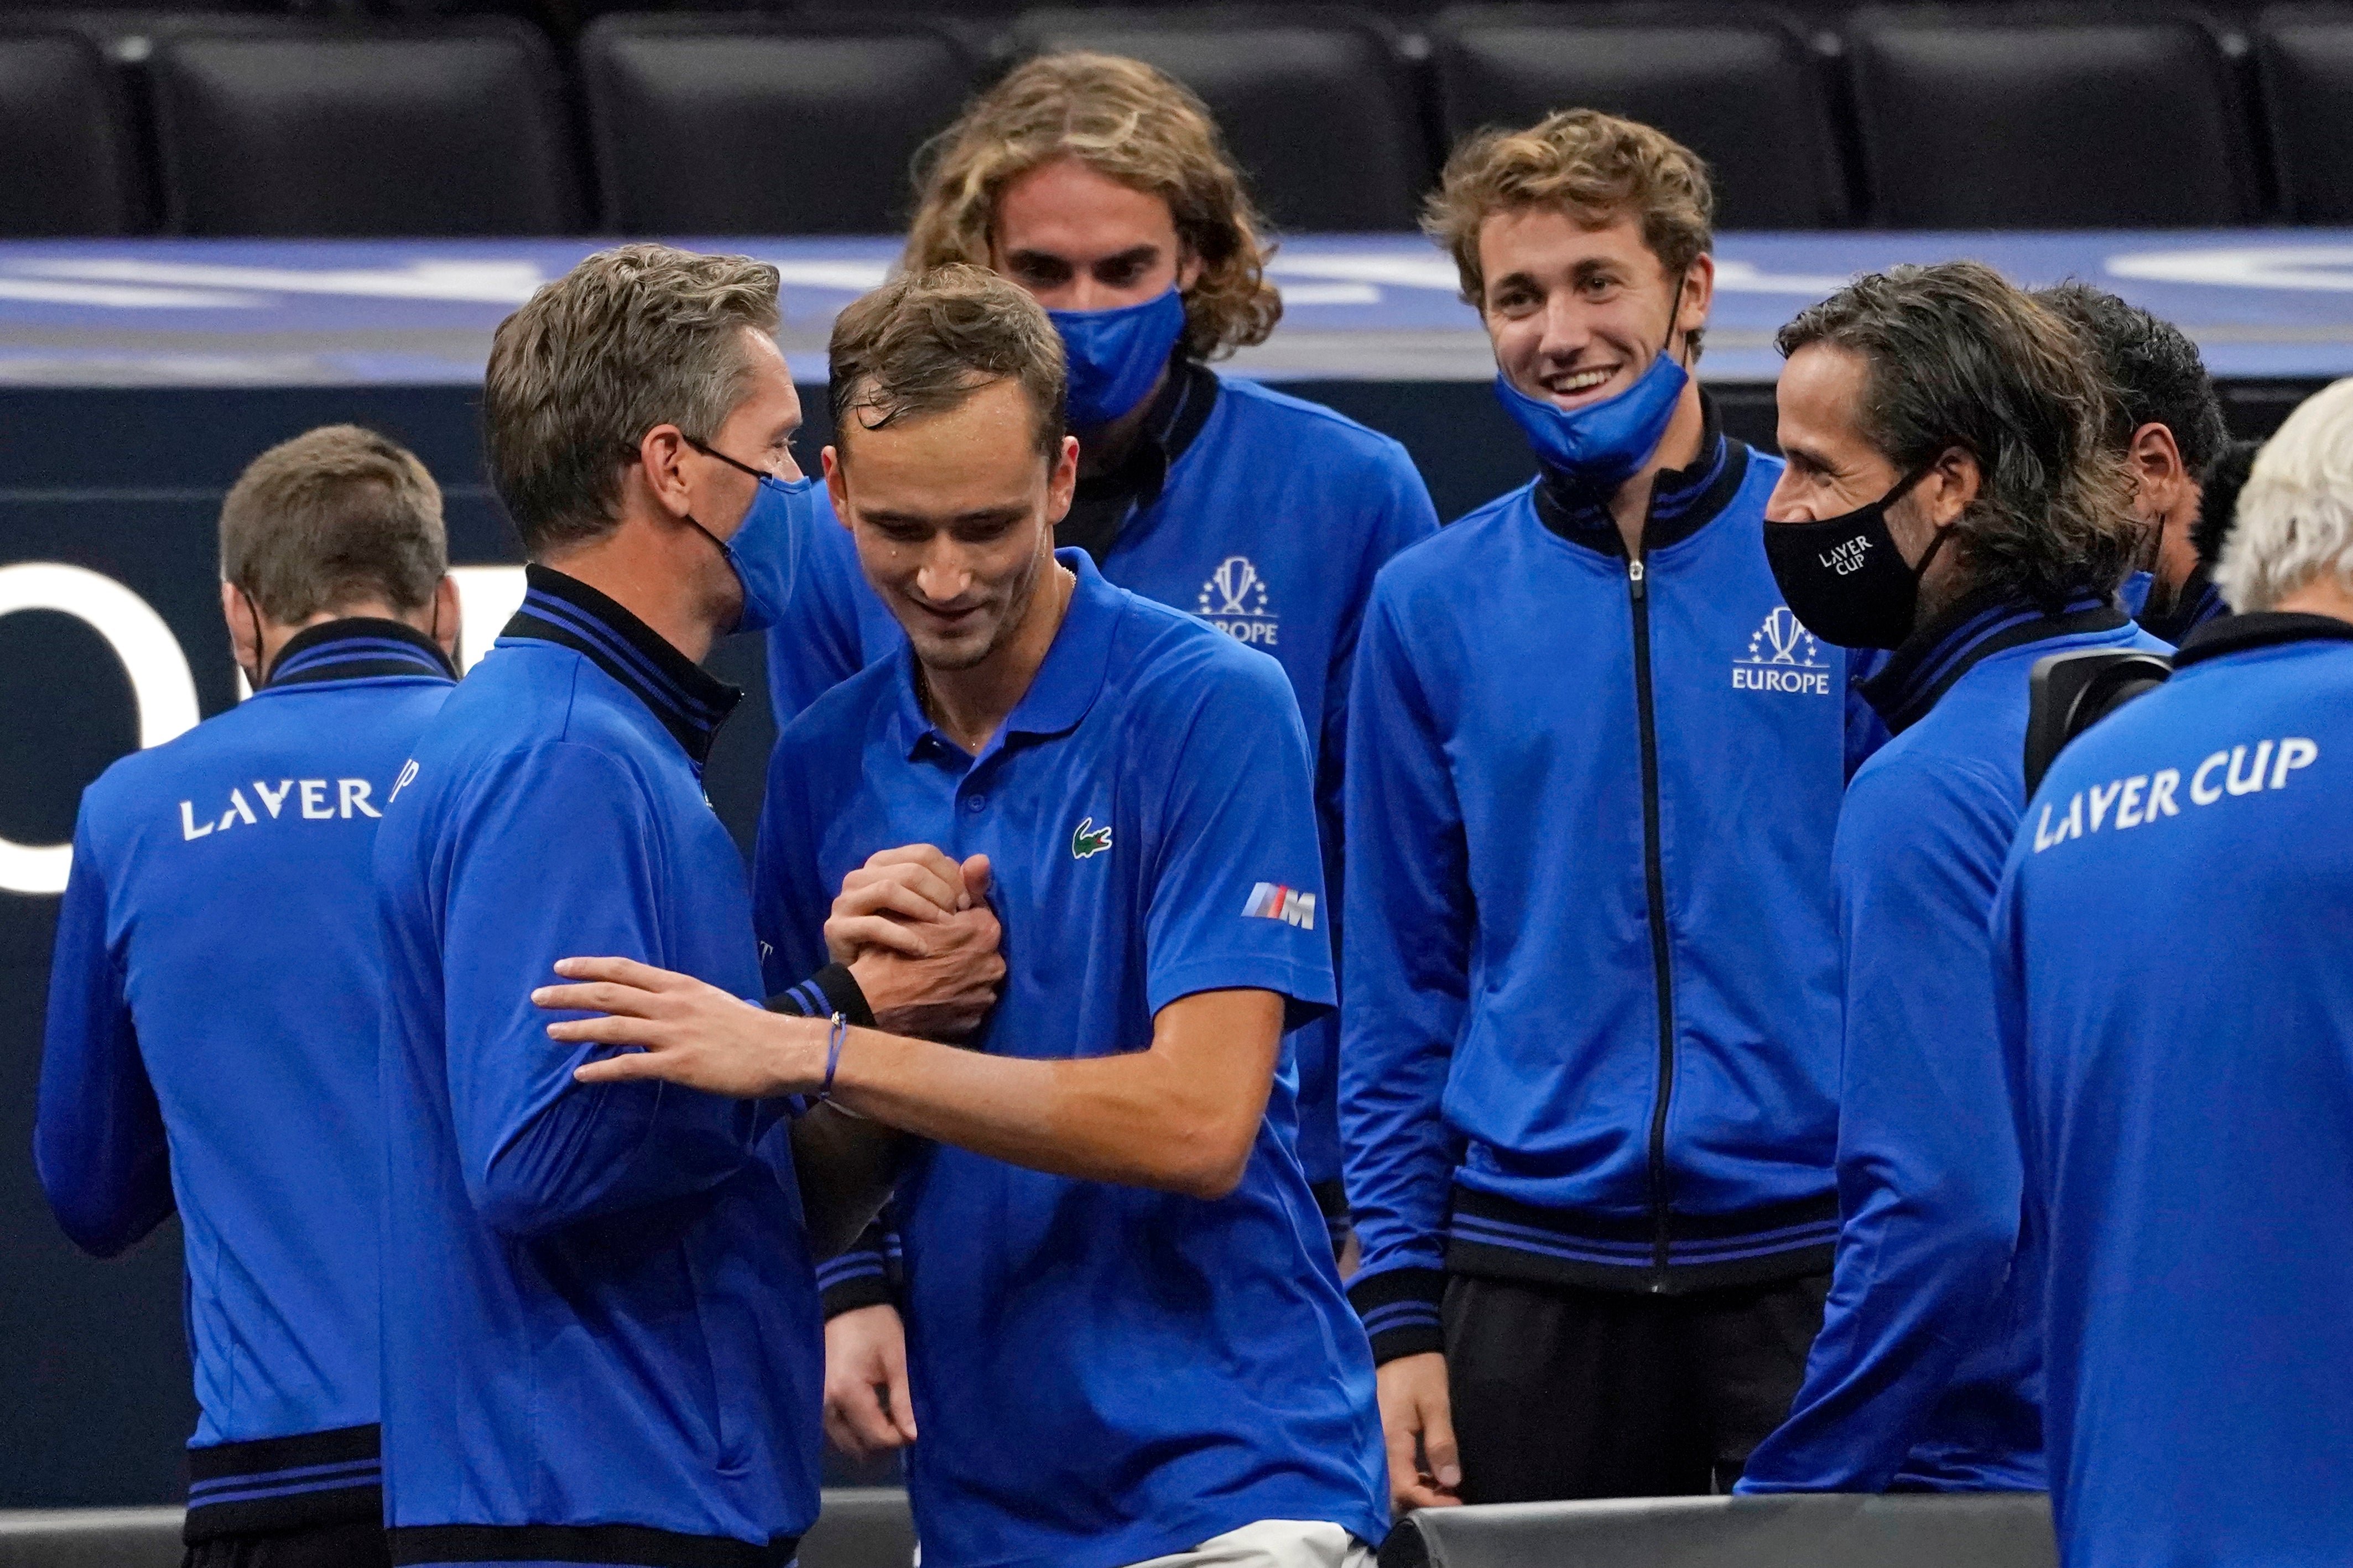 Europe claim fourth successive Laver Cup title with big win over World team The Independent